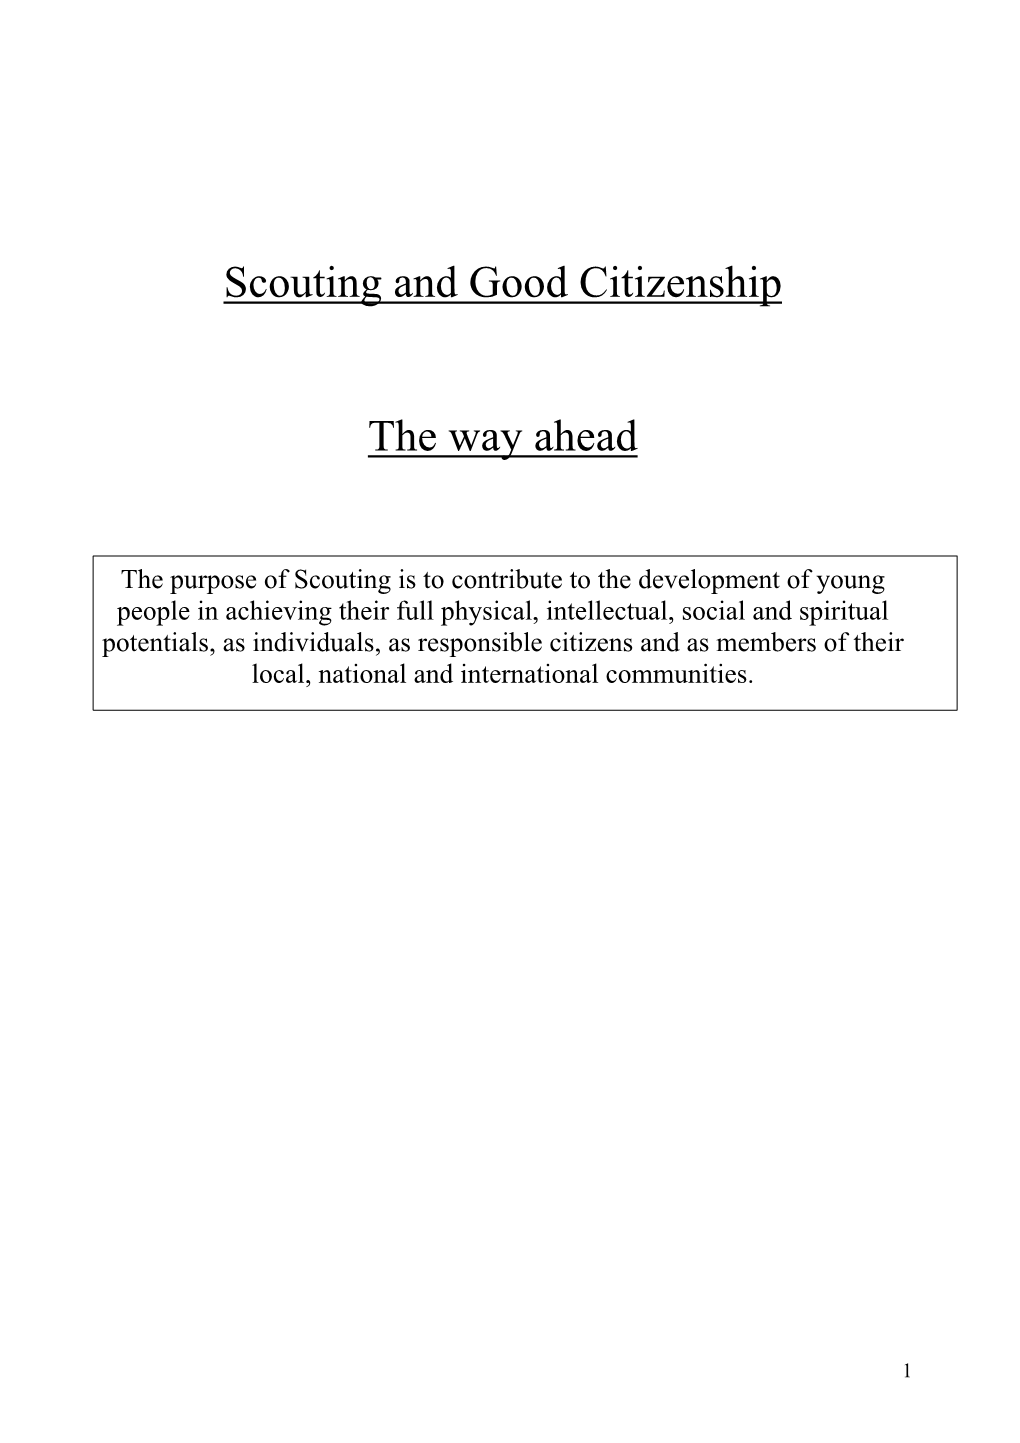 Scouting and Good Citizenship the Way Ahead